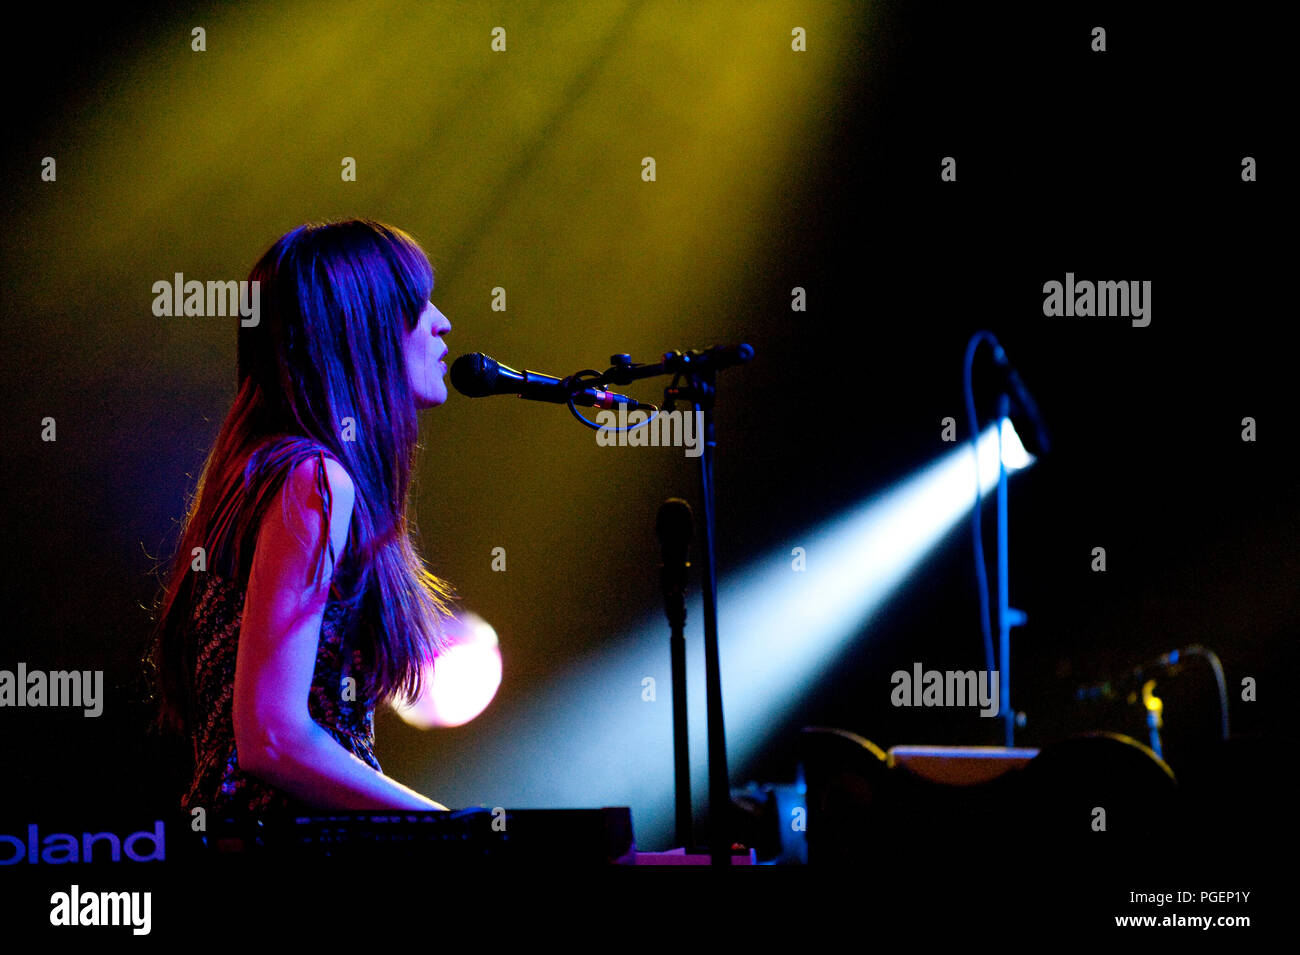 Electronic indie pop band Revoir Simone performing at the Nuits du Botanique festival Brussels (Belgium, 10/05/2009 Photo - Alamy